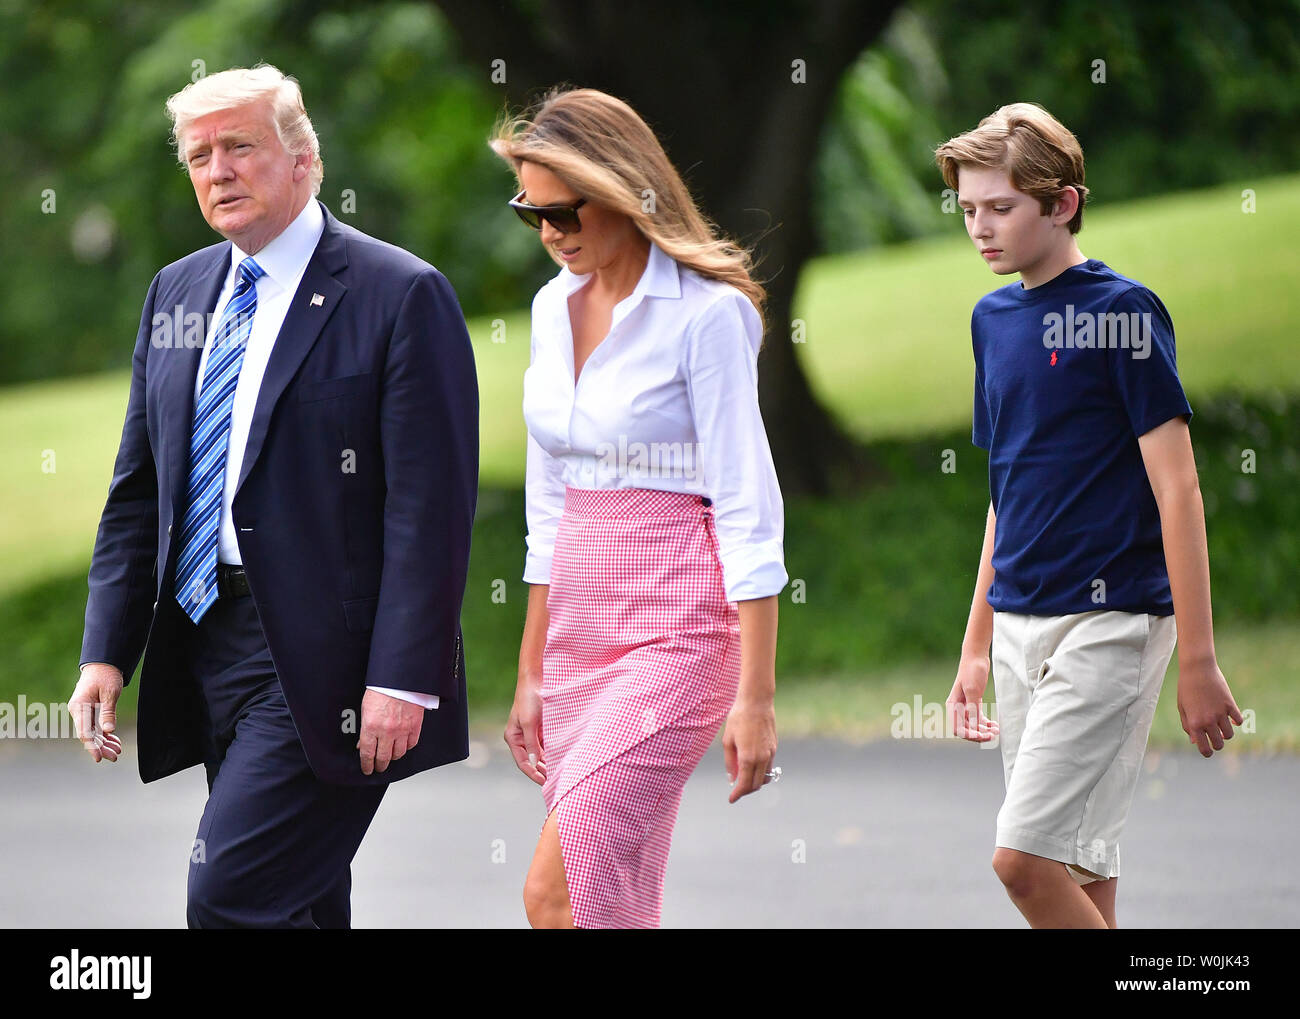 President Donald Trump, First Lady Melania Trump and their son Barron  depart the White House for a weekend trip to Bedminster, New Jersey, on  June 30, 2017 in Washington, D.C. Photo by